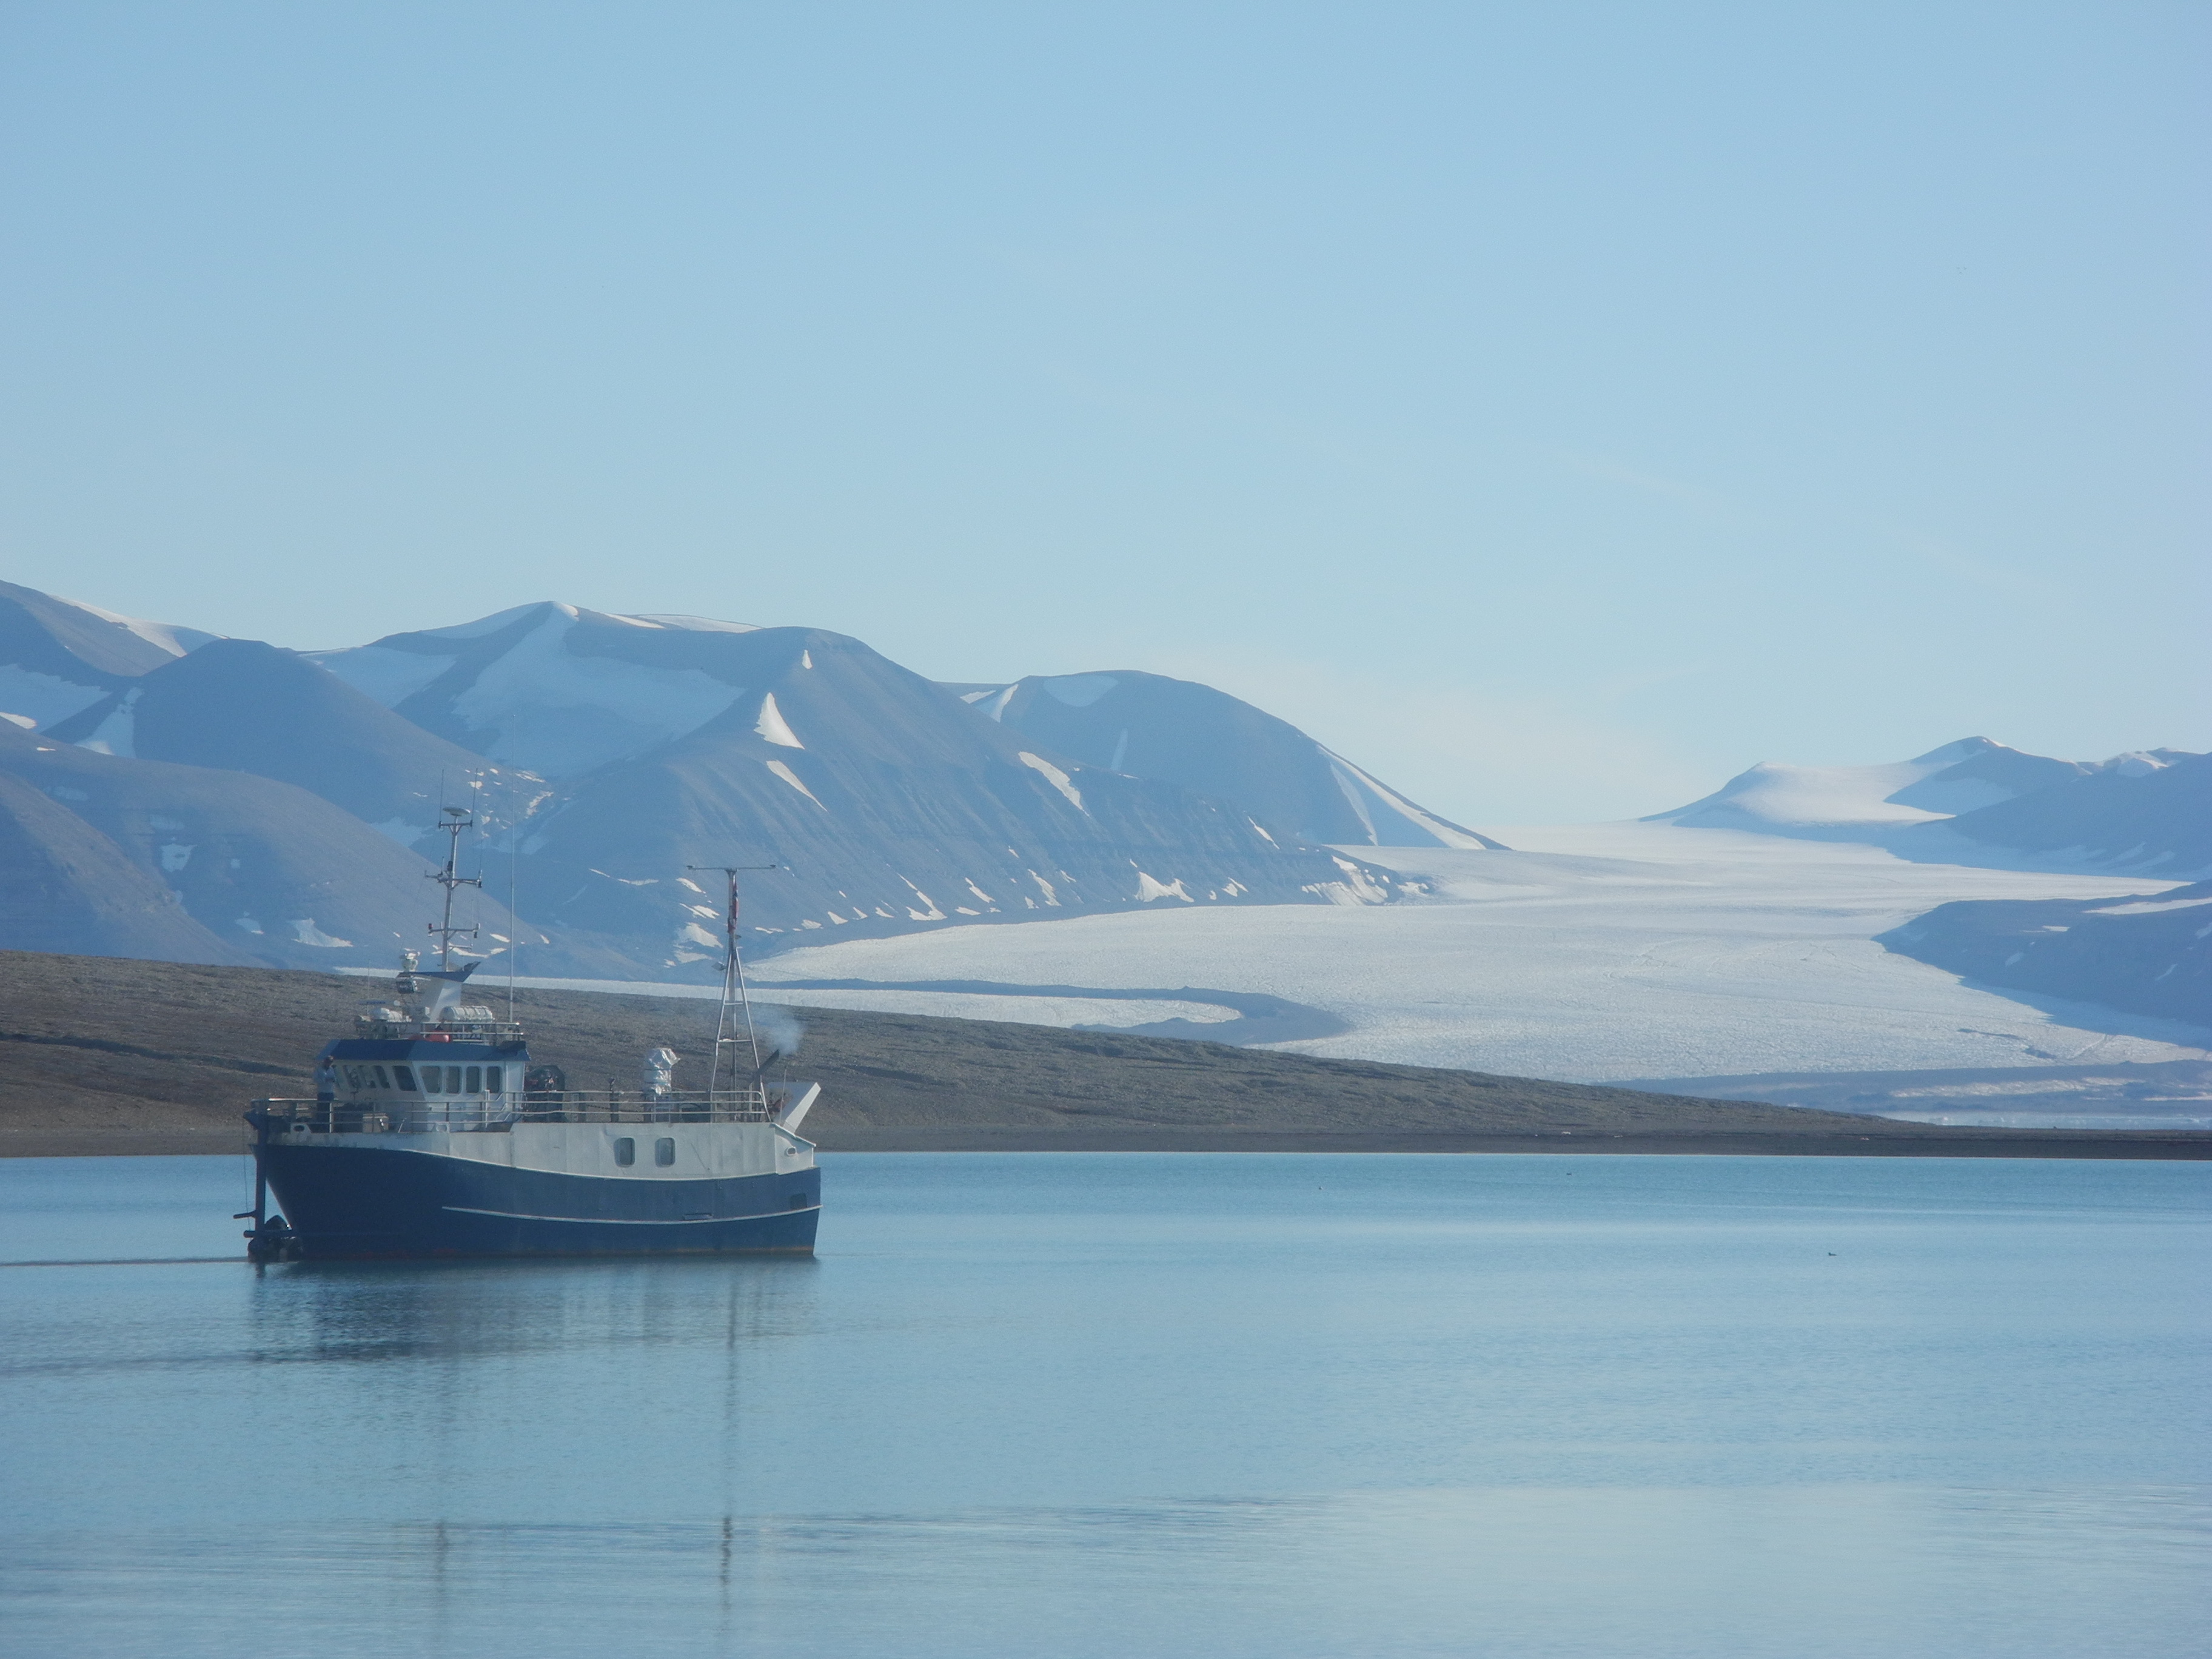 The Viking Explorer moored in a calm area of Tempelfjorden, Svalbard (August, 2016)